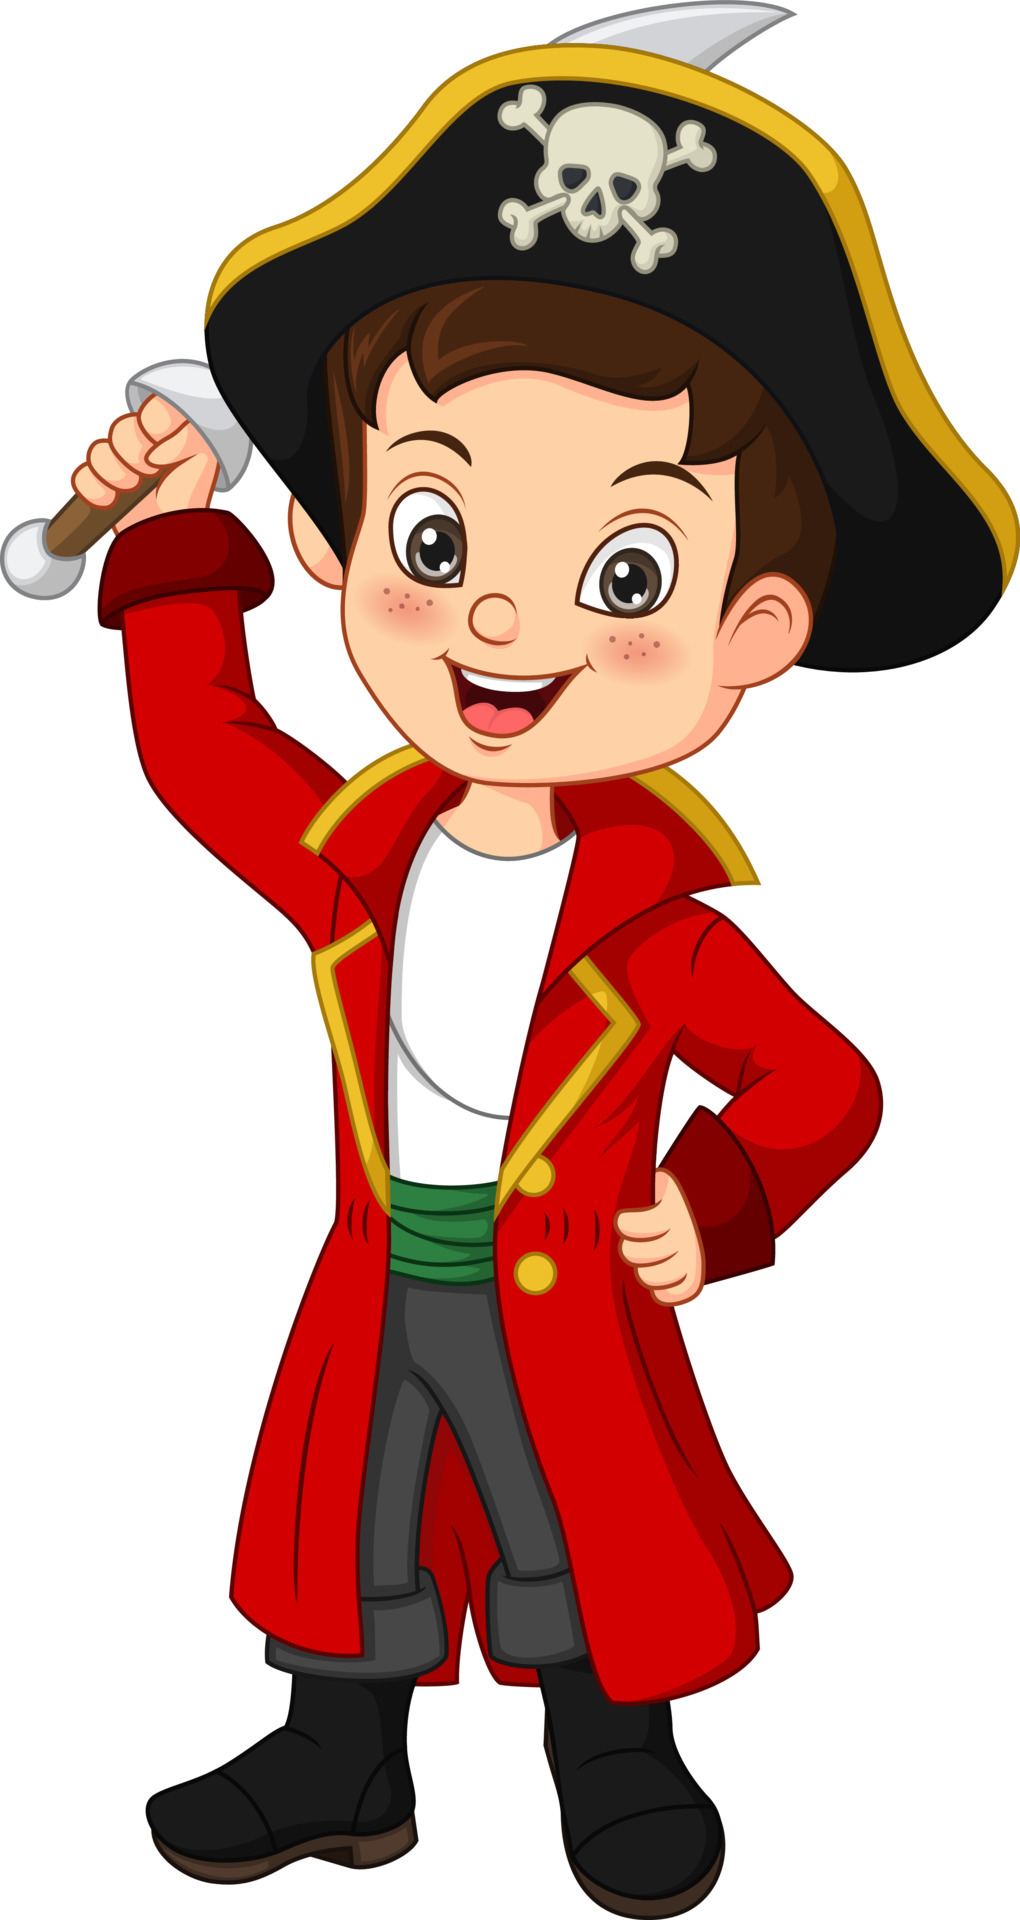 Pirate Boy Vector Art, Icons, and Graphics for Free Download